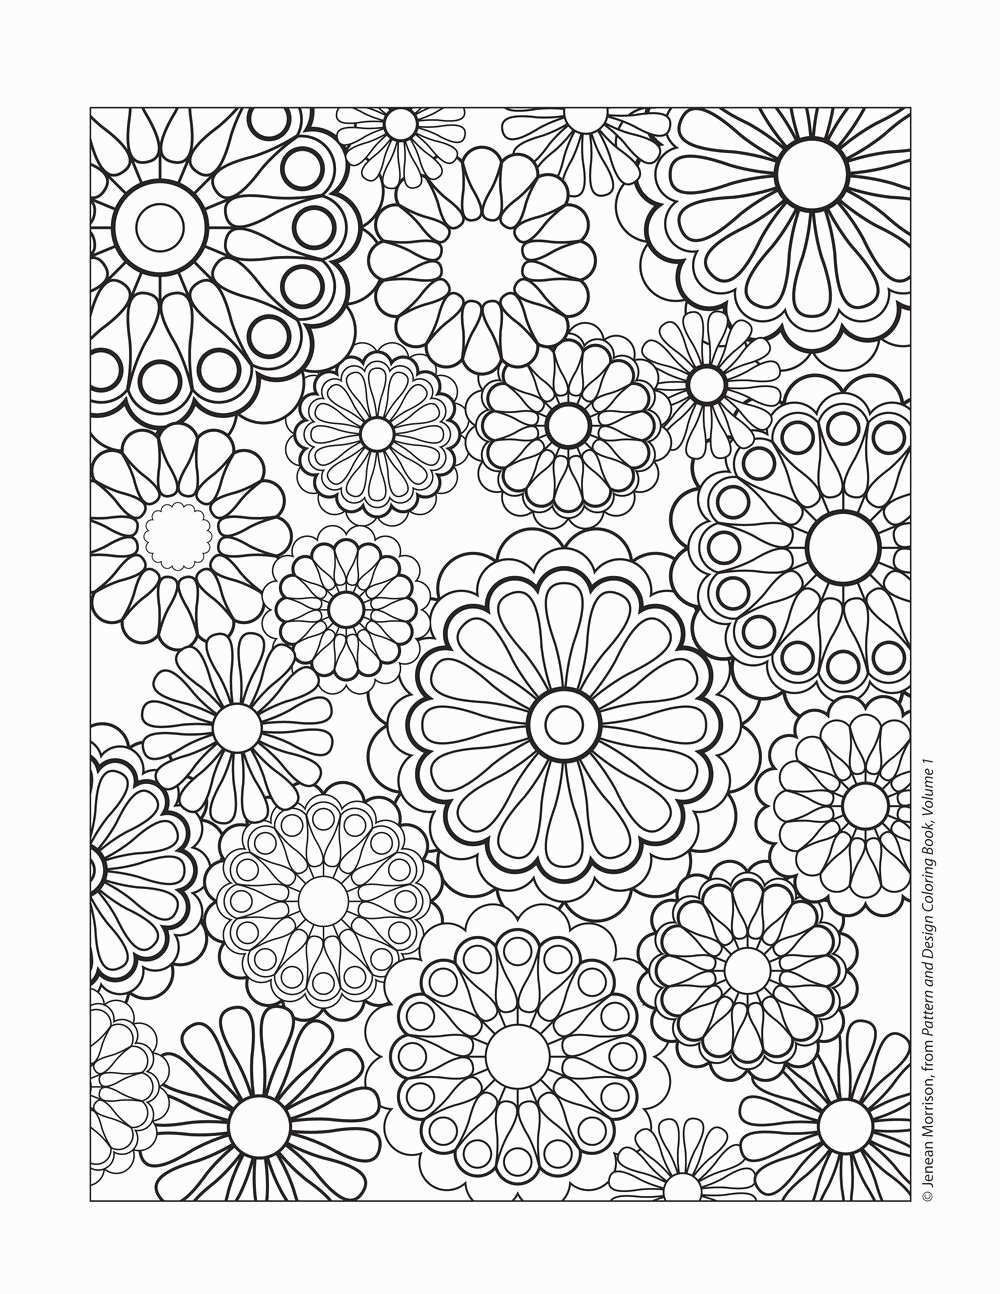 pictures of flowers in a vase of colored pages fresh cool vases flower vase coloring page pages within colored pages fresh cool vases flower vase coloring page pages flowers in a top i 0d